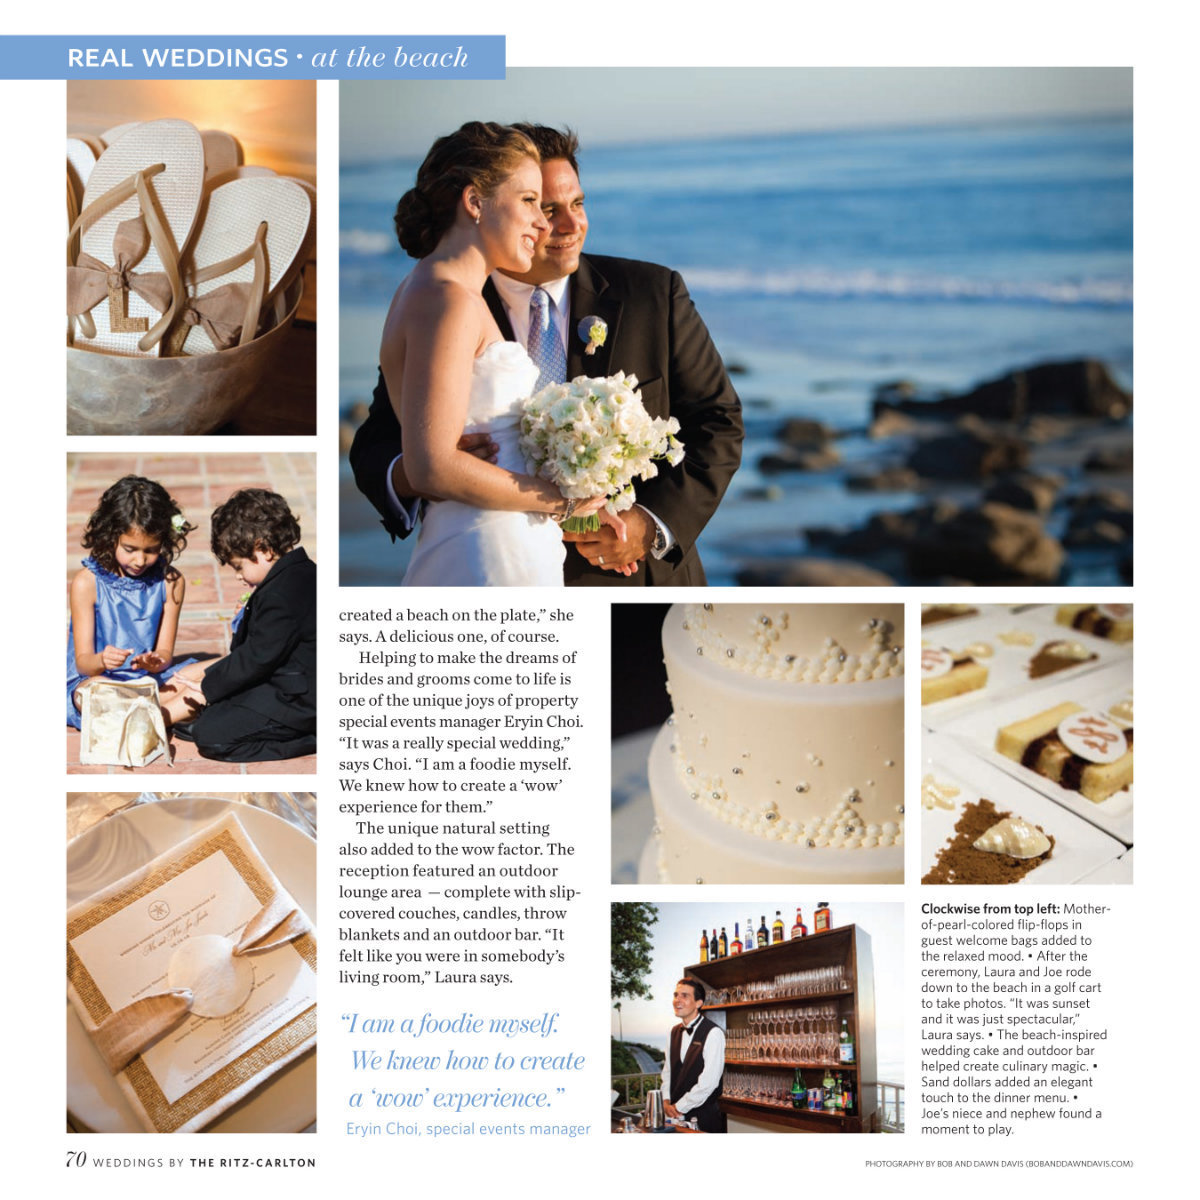 So excited to have Laura & Joe's wedding, designed by Lisa Vorce, featured in Weddings by Ritz-Carlton magazine in the July-December 2011 edition. Their wedding was incredibly beautiful on the coast of Dana Point, California at the The Ritz-Carlton, Laguna Niguel. Everything was perfect, right down to the sand dollars that wrapped the dinner menus, to the almond wedding cake with Bavarian chocolate and hazelnut crunch, sprinkled with brown sugar to resemble the beautiful sandy beaches. Simply magnificent and we wouldn't expect anything less from Laura and Joe.